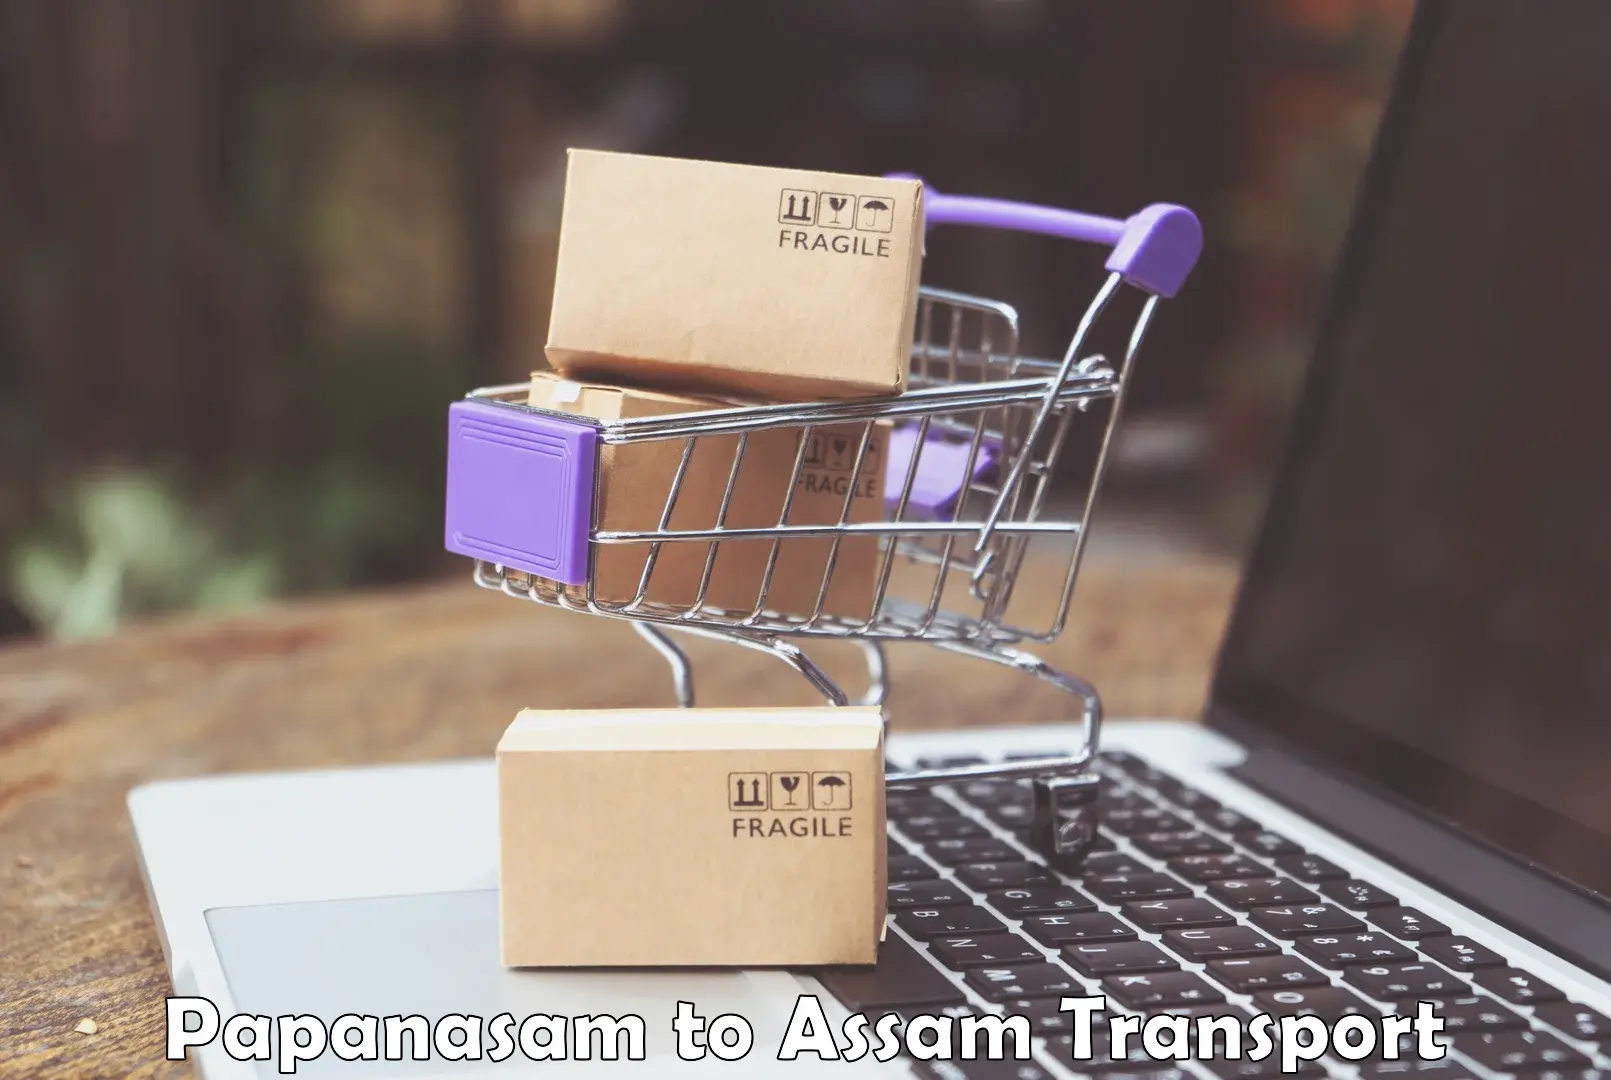 Cargo transport services in Papanasam to Assam